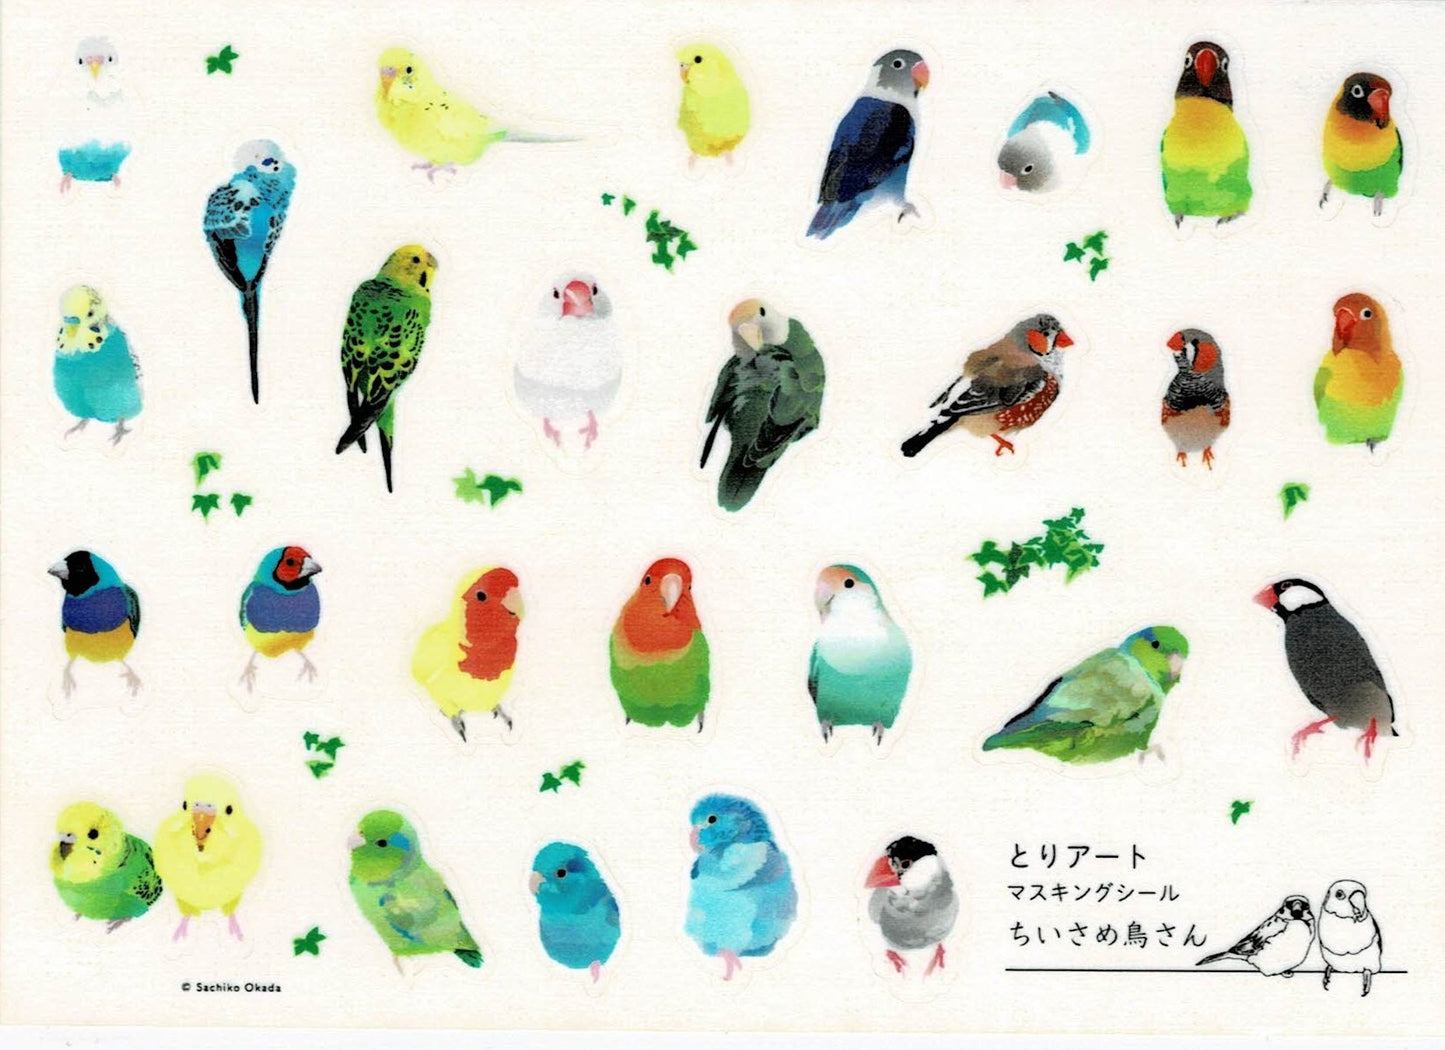 Budgie Pacific Parrotlet Lovebird Gouldian Finch Zebra Finch Java Sparrow Japanese Washi Stickers